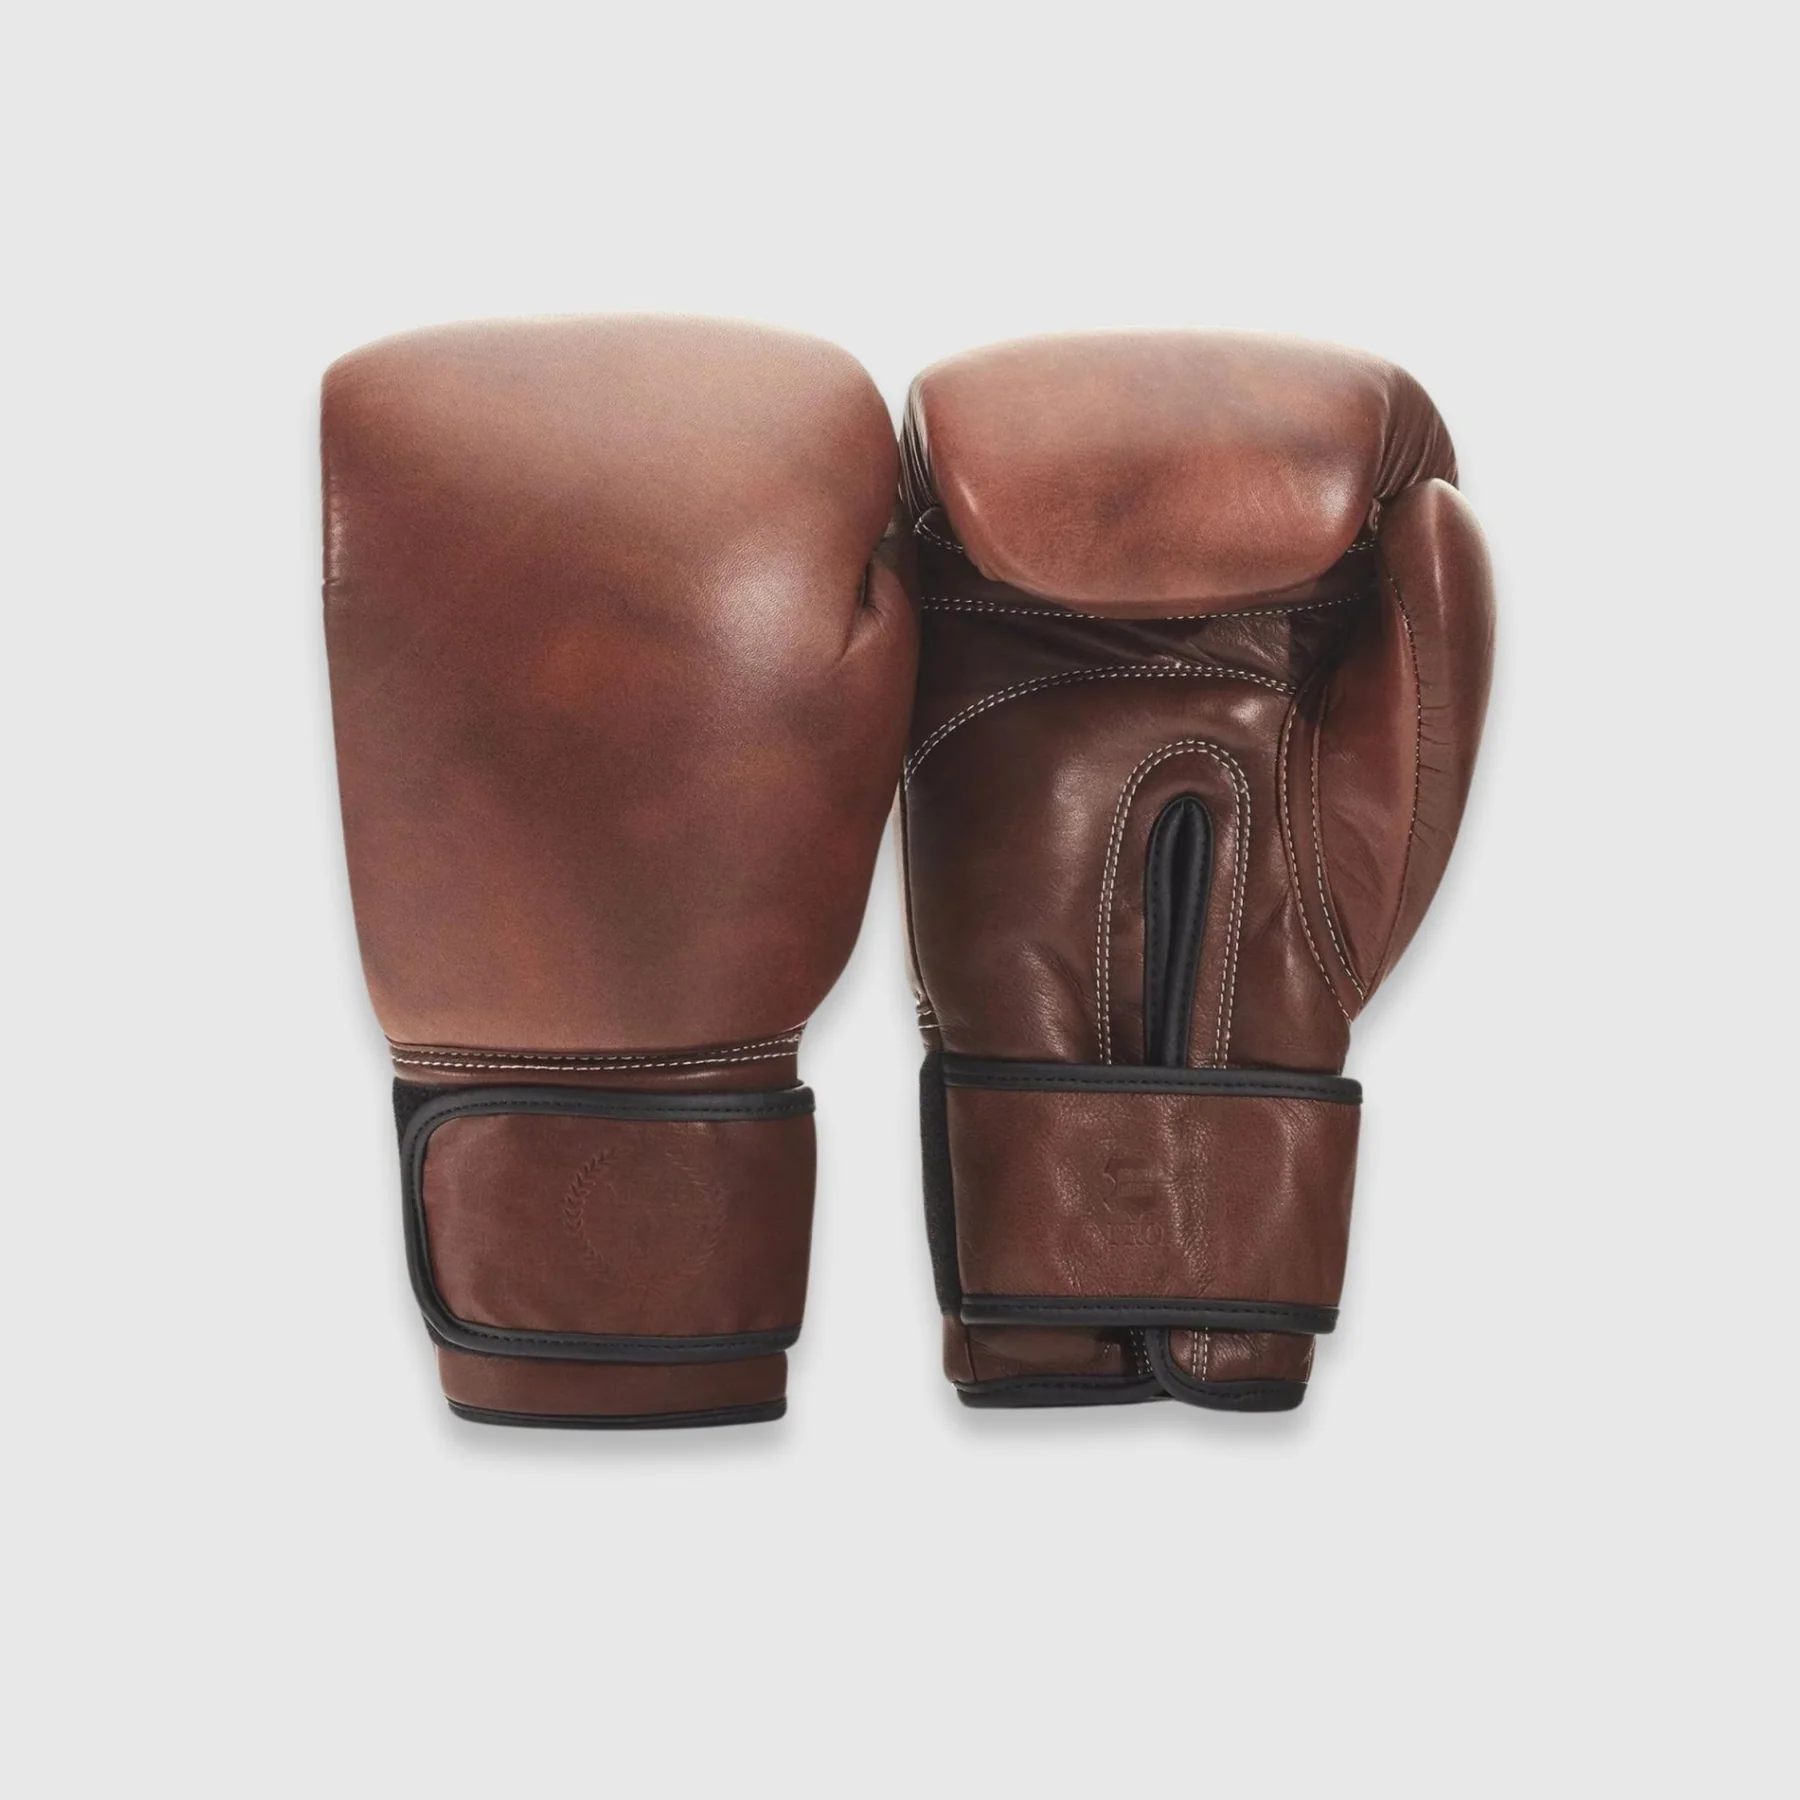 Feel the Difference: Focus on Leather Boxing Gloves - lostbubbles.com